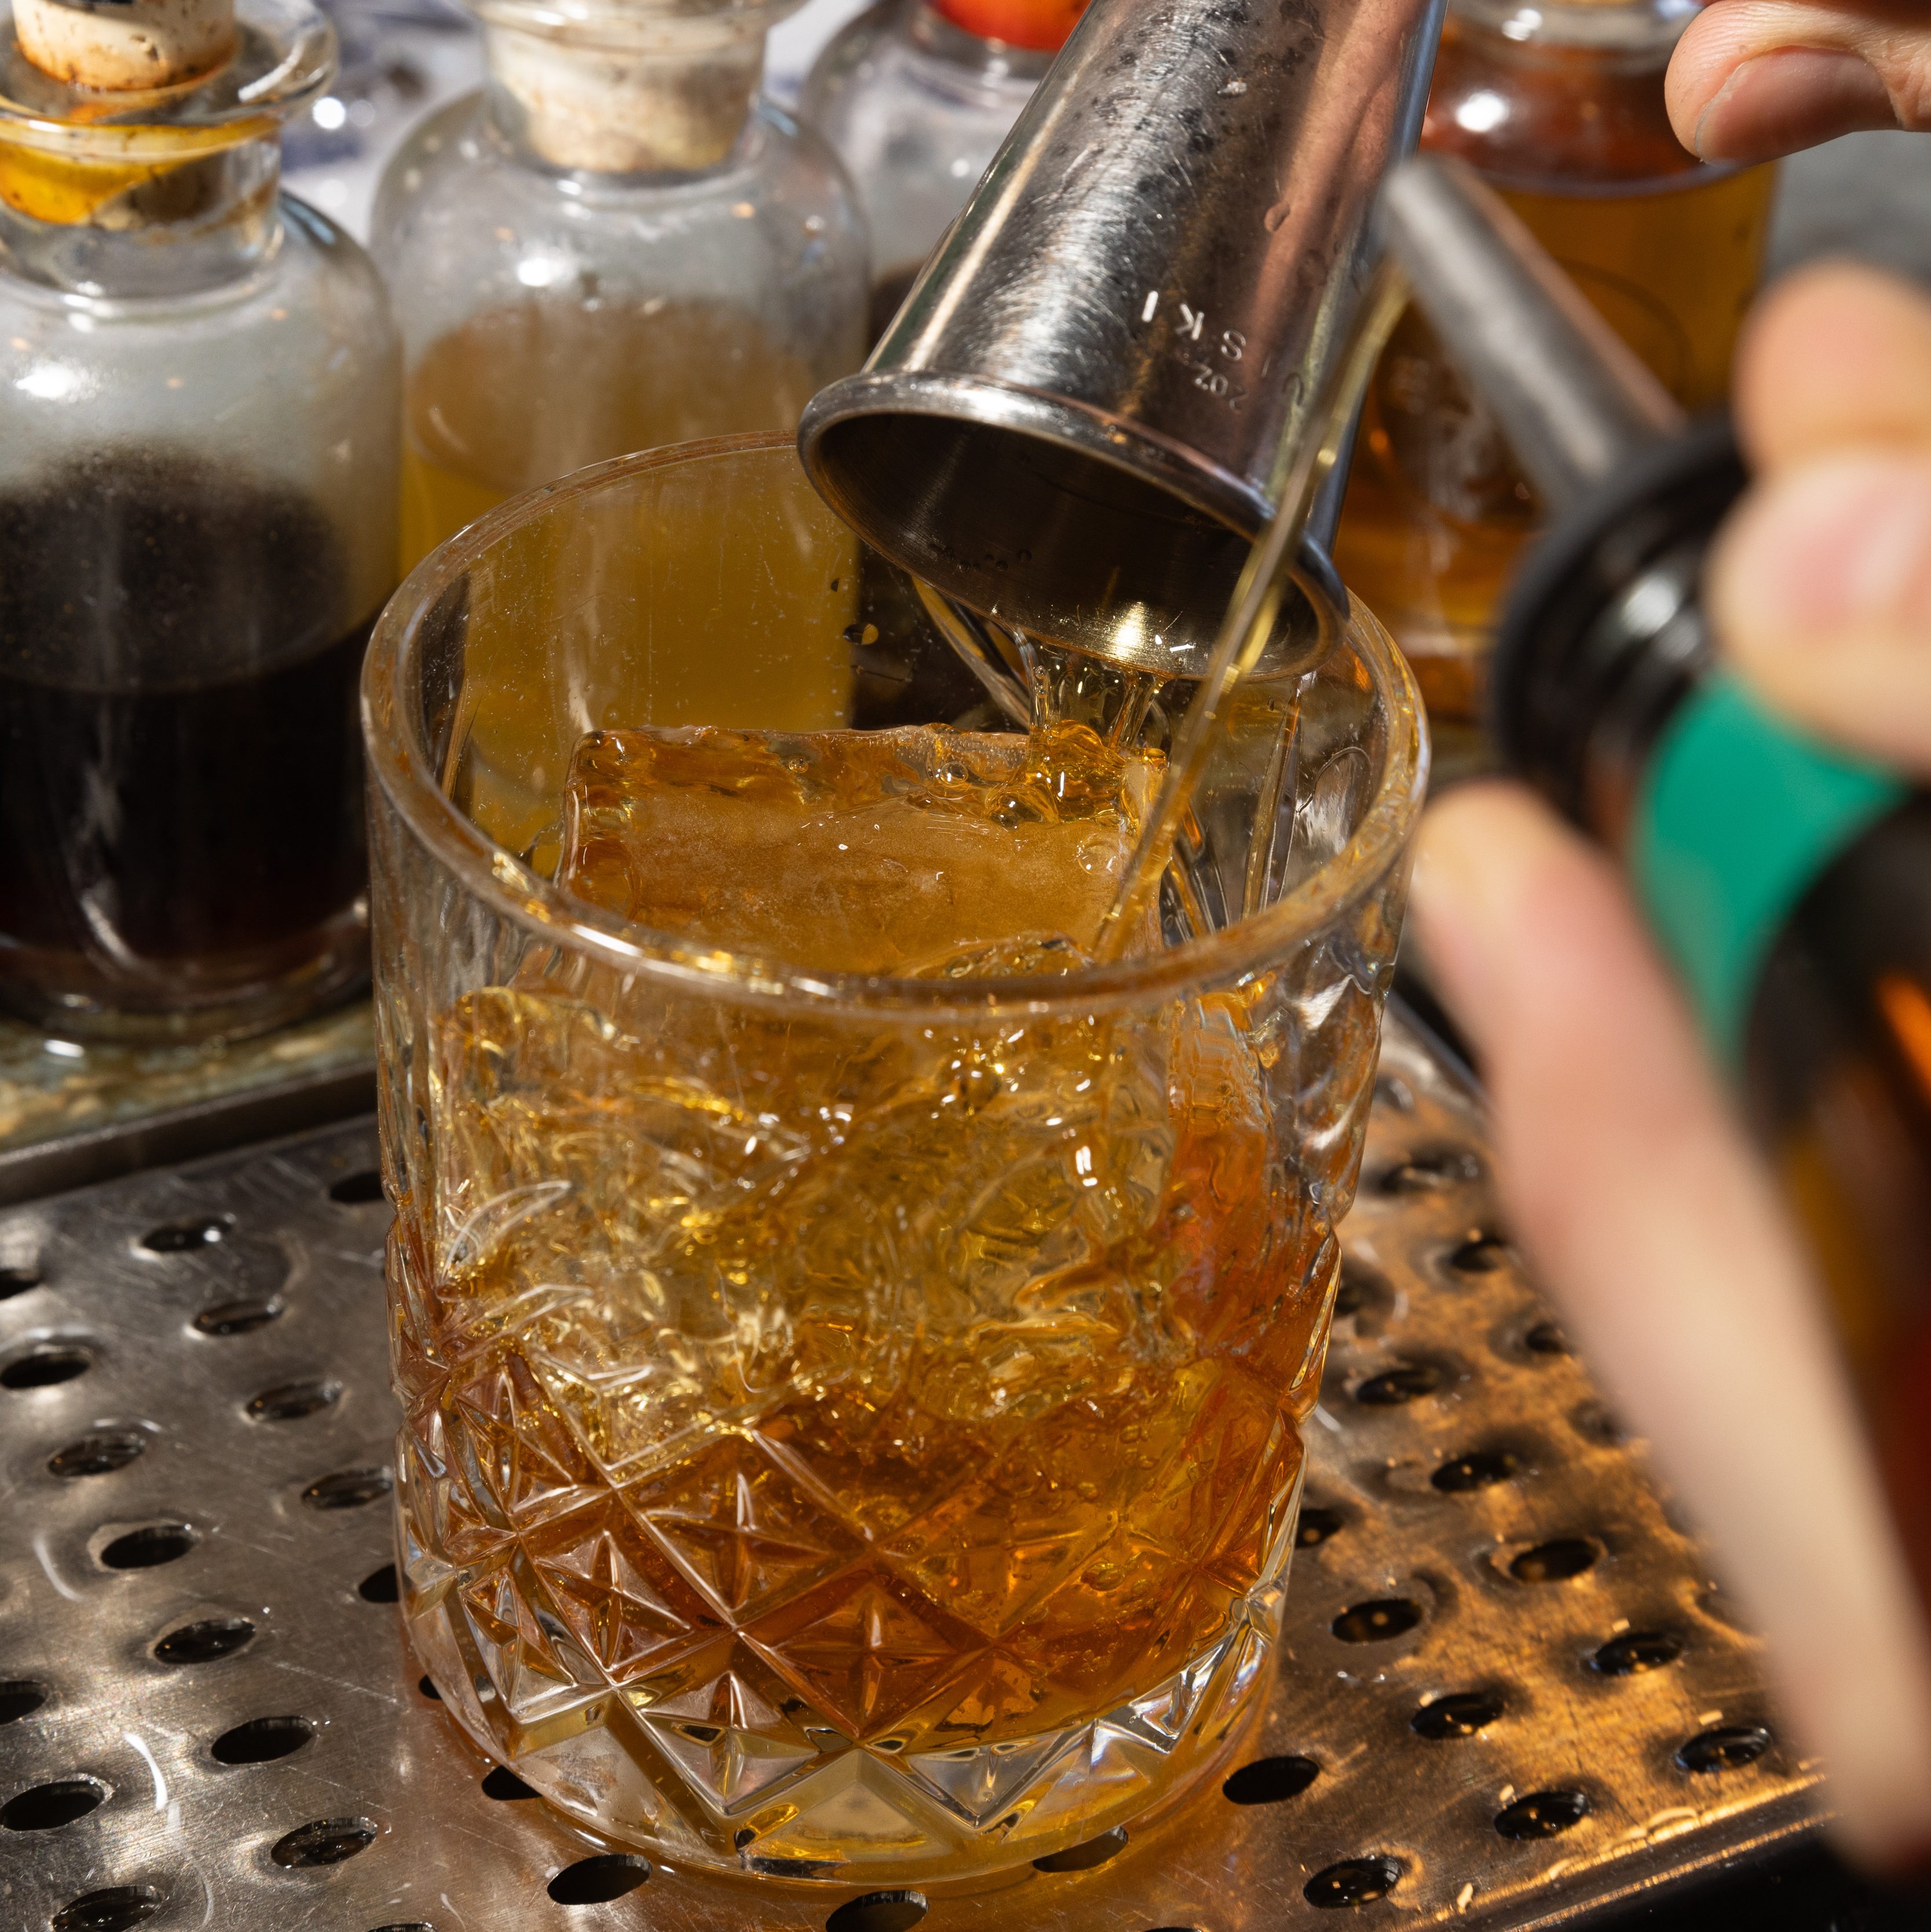 A hand is pouring a golden liquid from a jigger into a glass with ice on a metal drip tray. Several small glass bottles with cork stoppers are visible in the background.